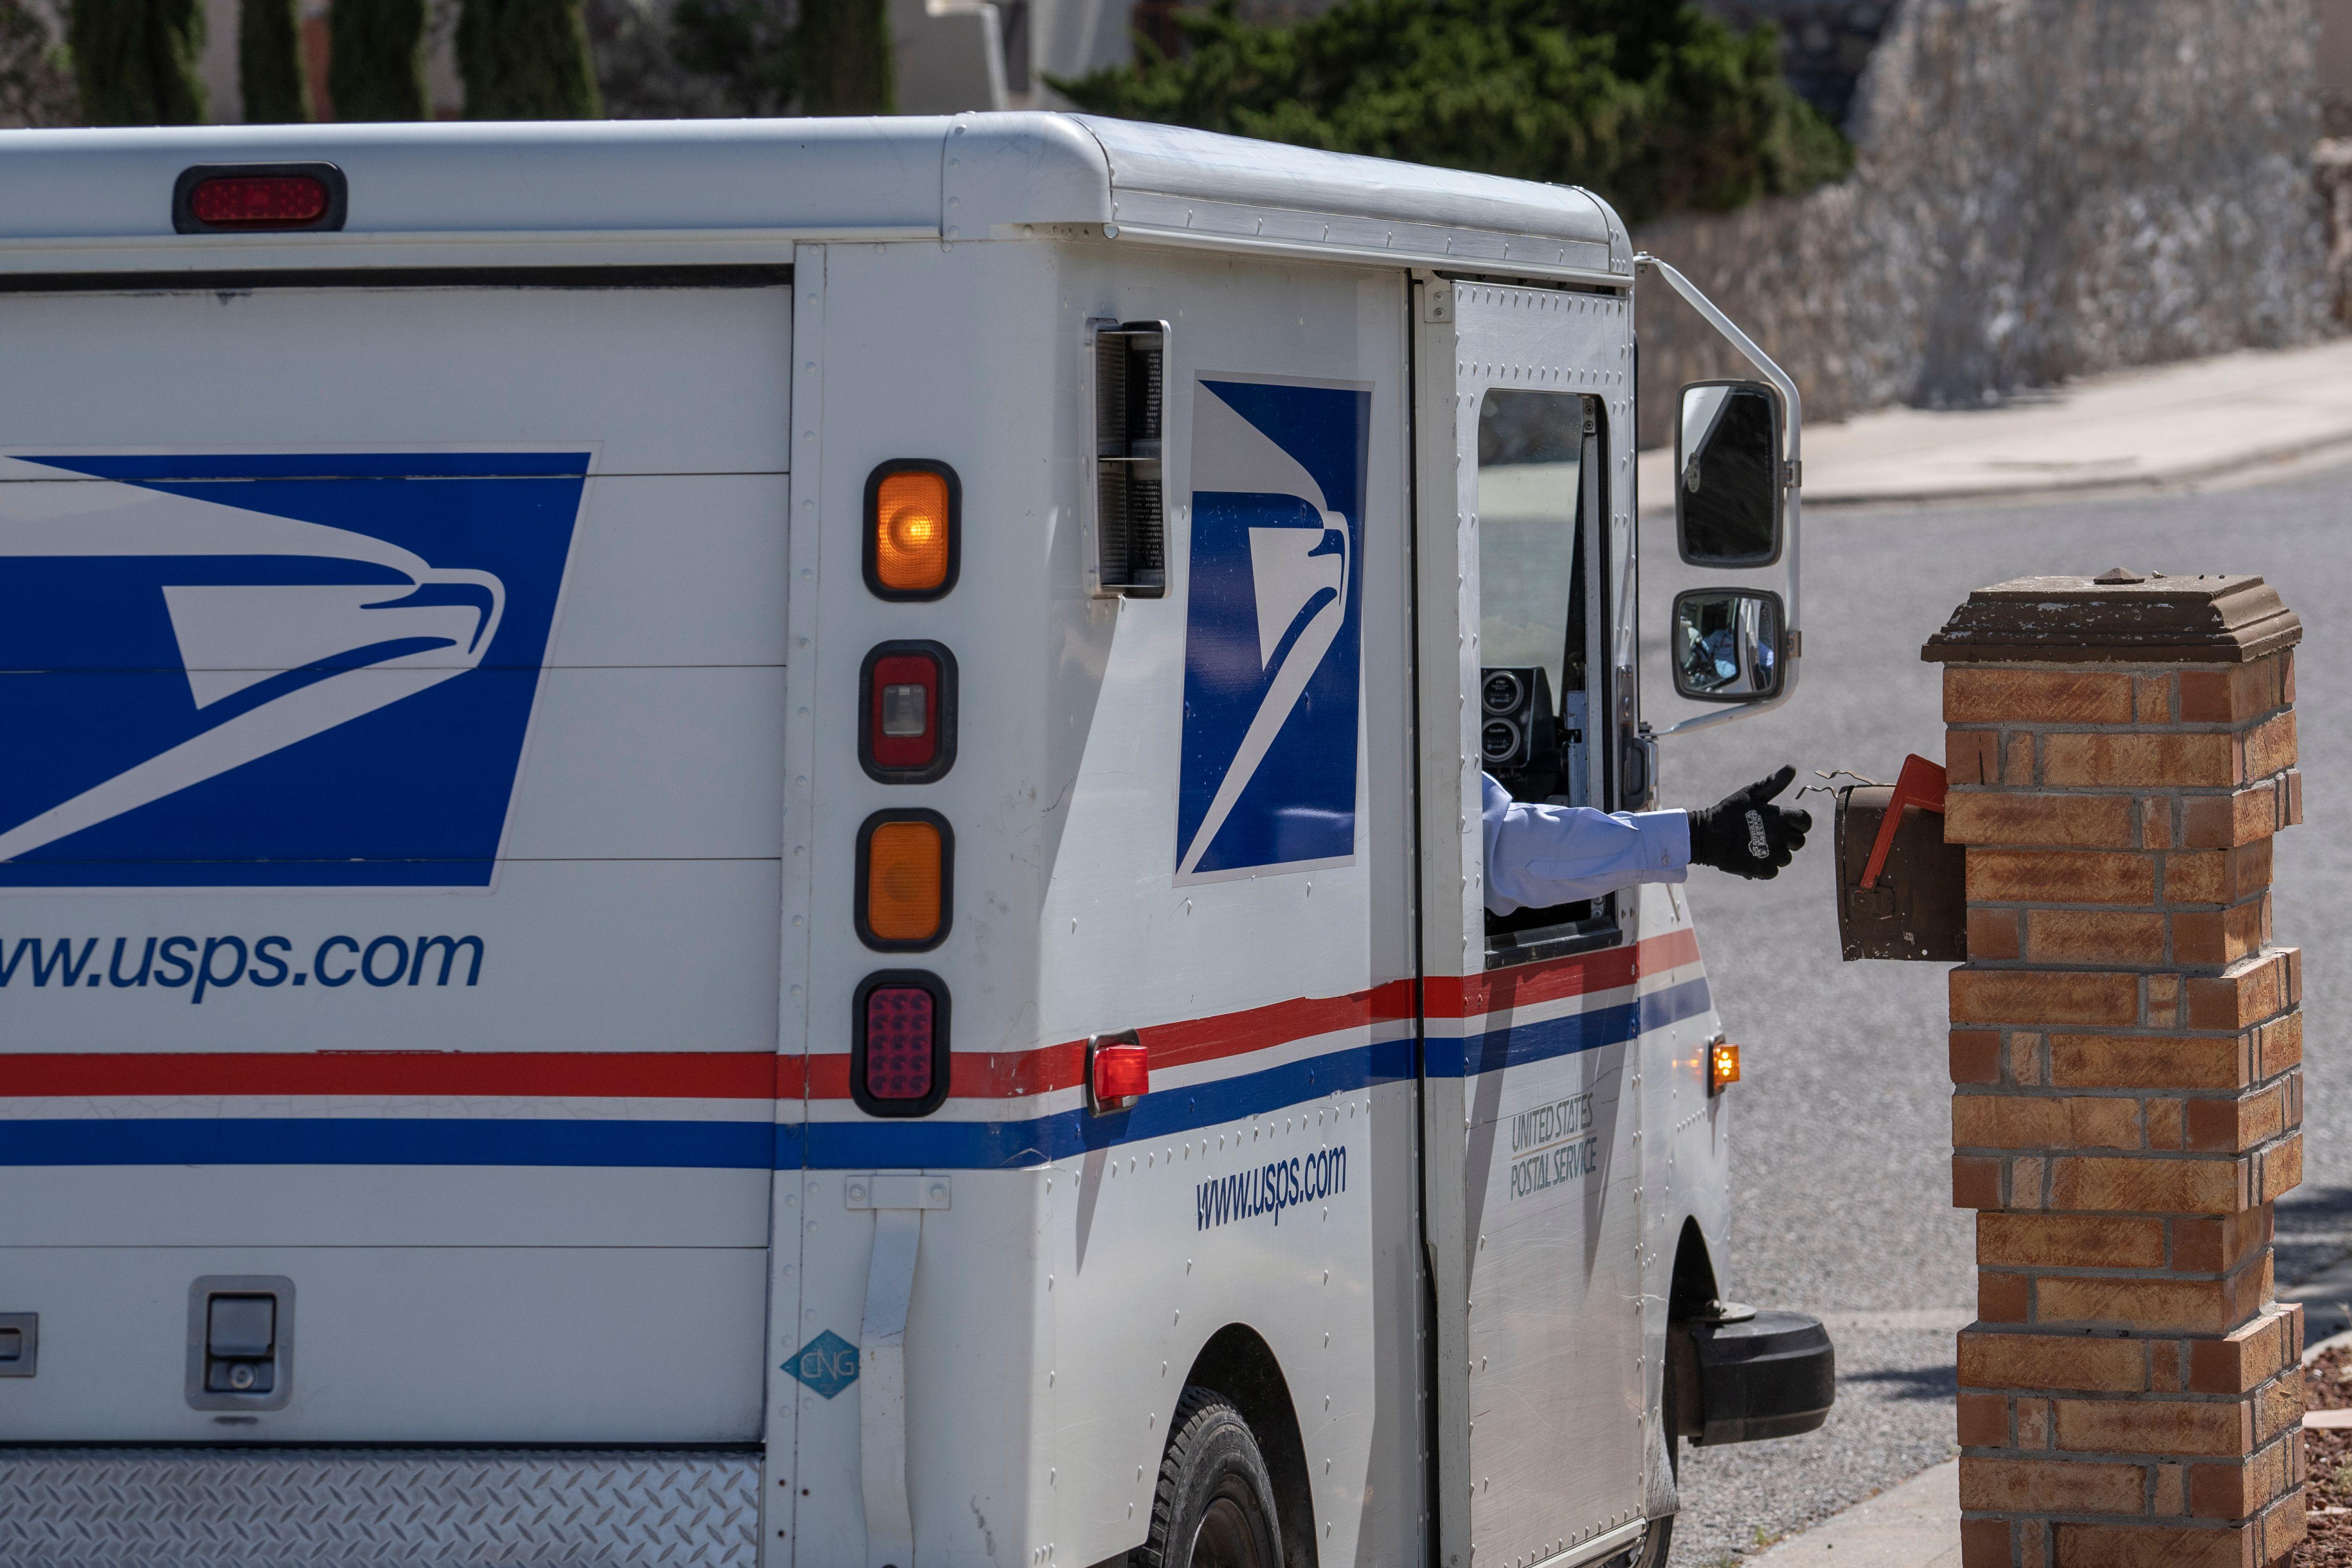 A hand sticks out the window of a mail carrier to place mail inside a mailbox.